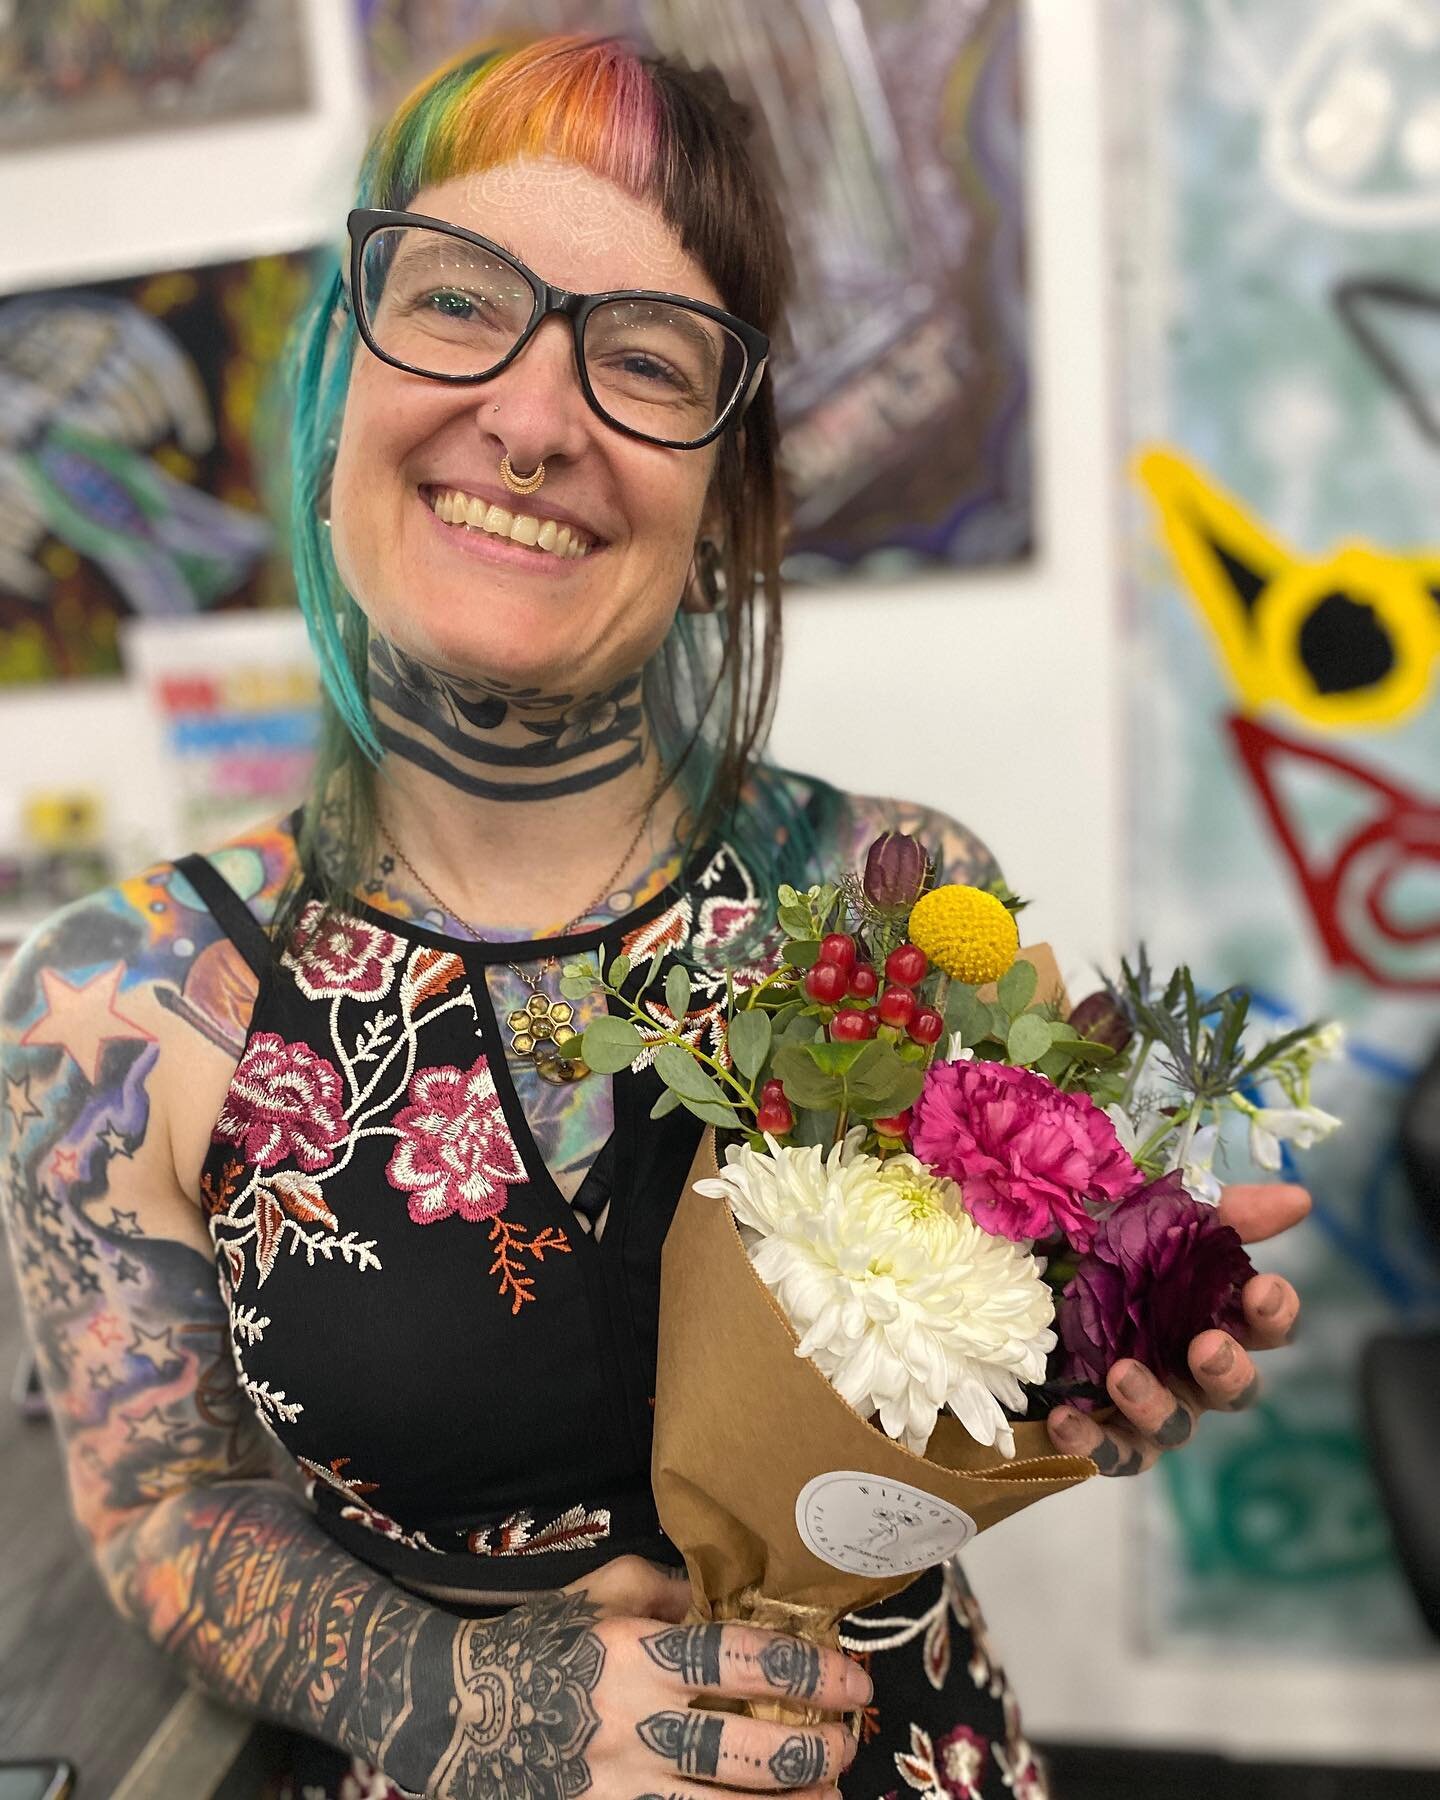 Holy Shit! 
Yesterday was soooo much fun! I loved that party!
I am just so incredibly grateful for the awesome community of artists, stylists, clients, neighbors, and friends who make this space what it is! 
Yesterday was exactly what I envisioned it